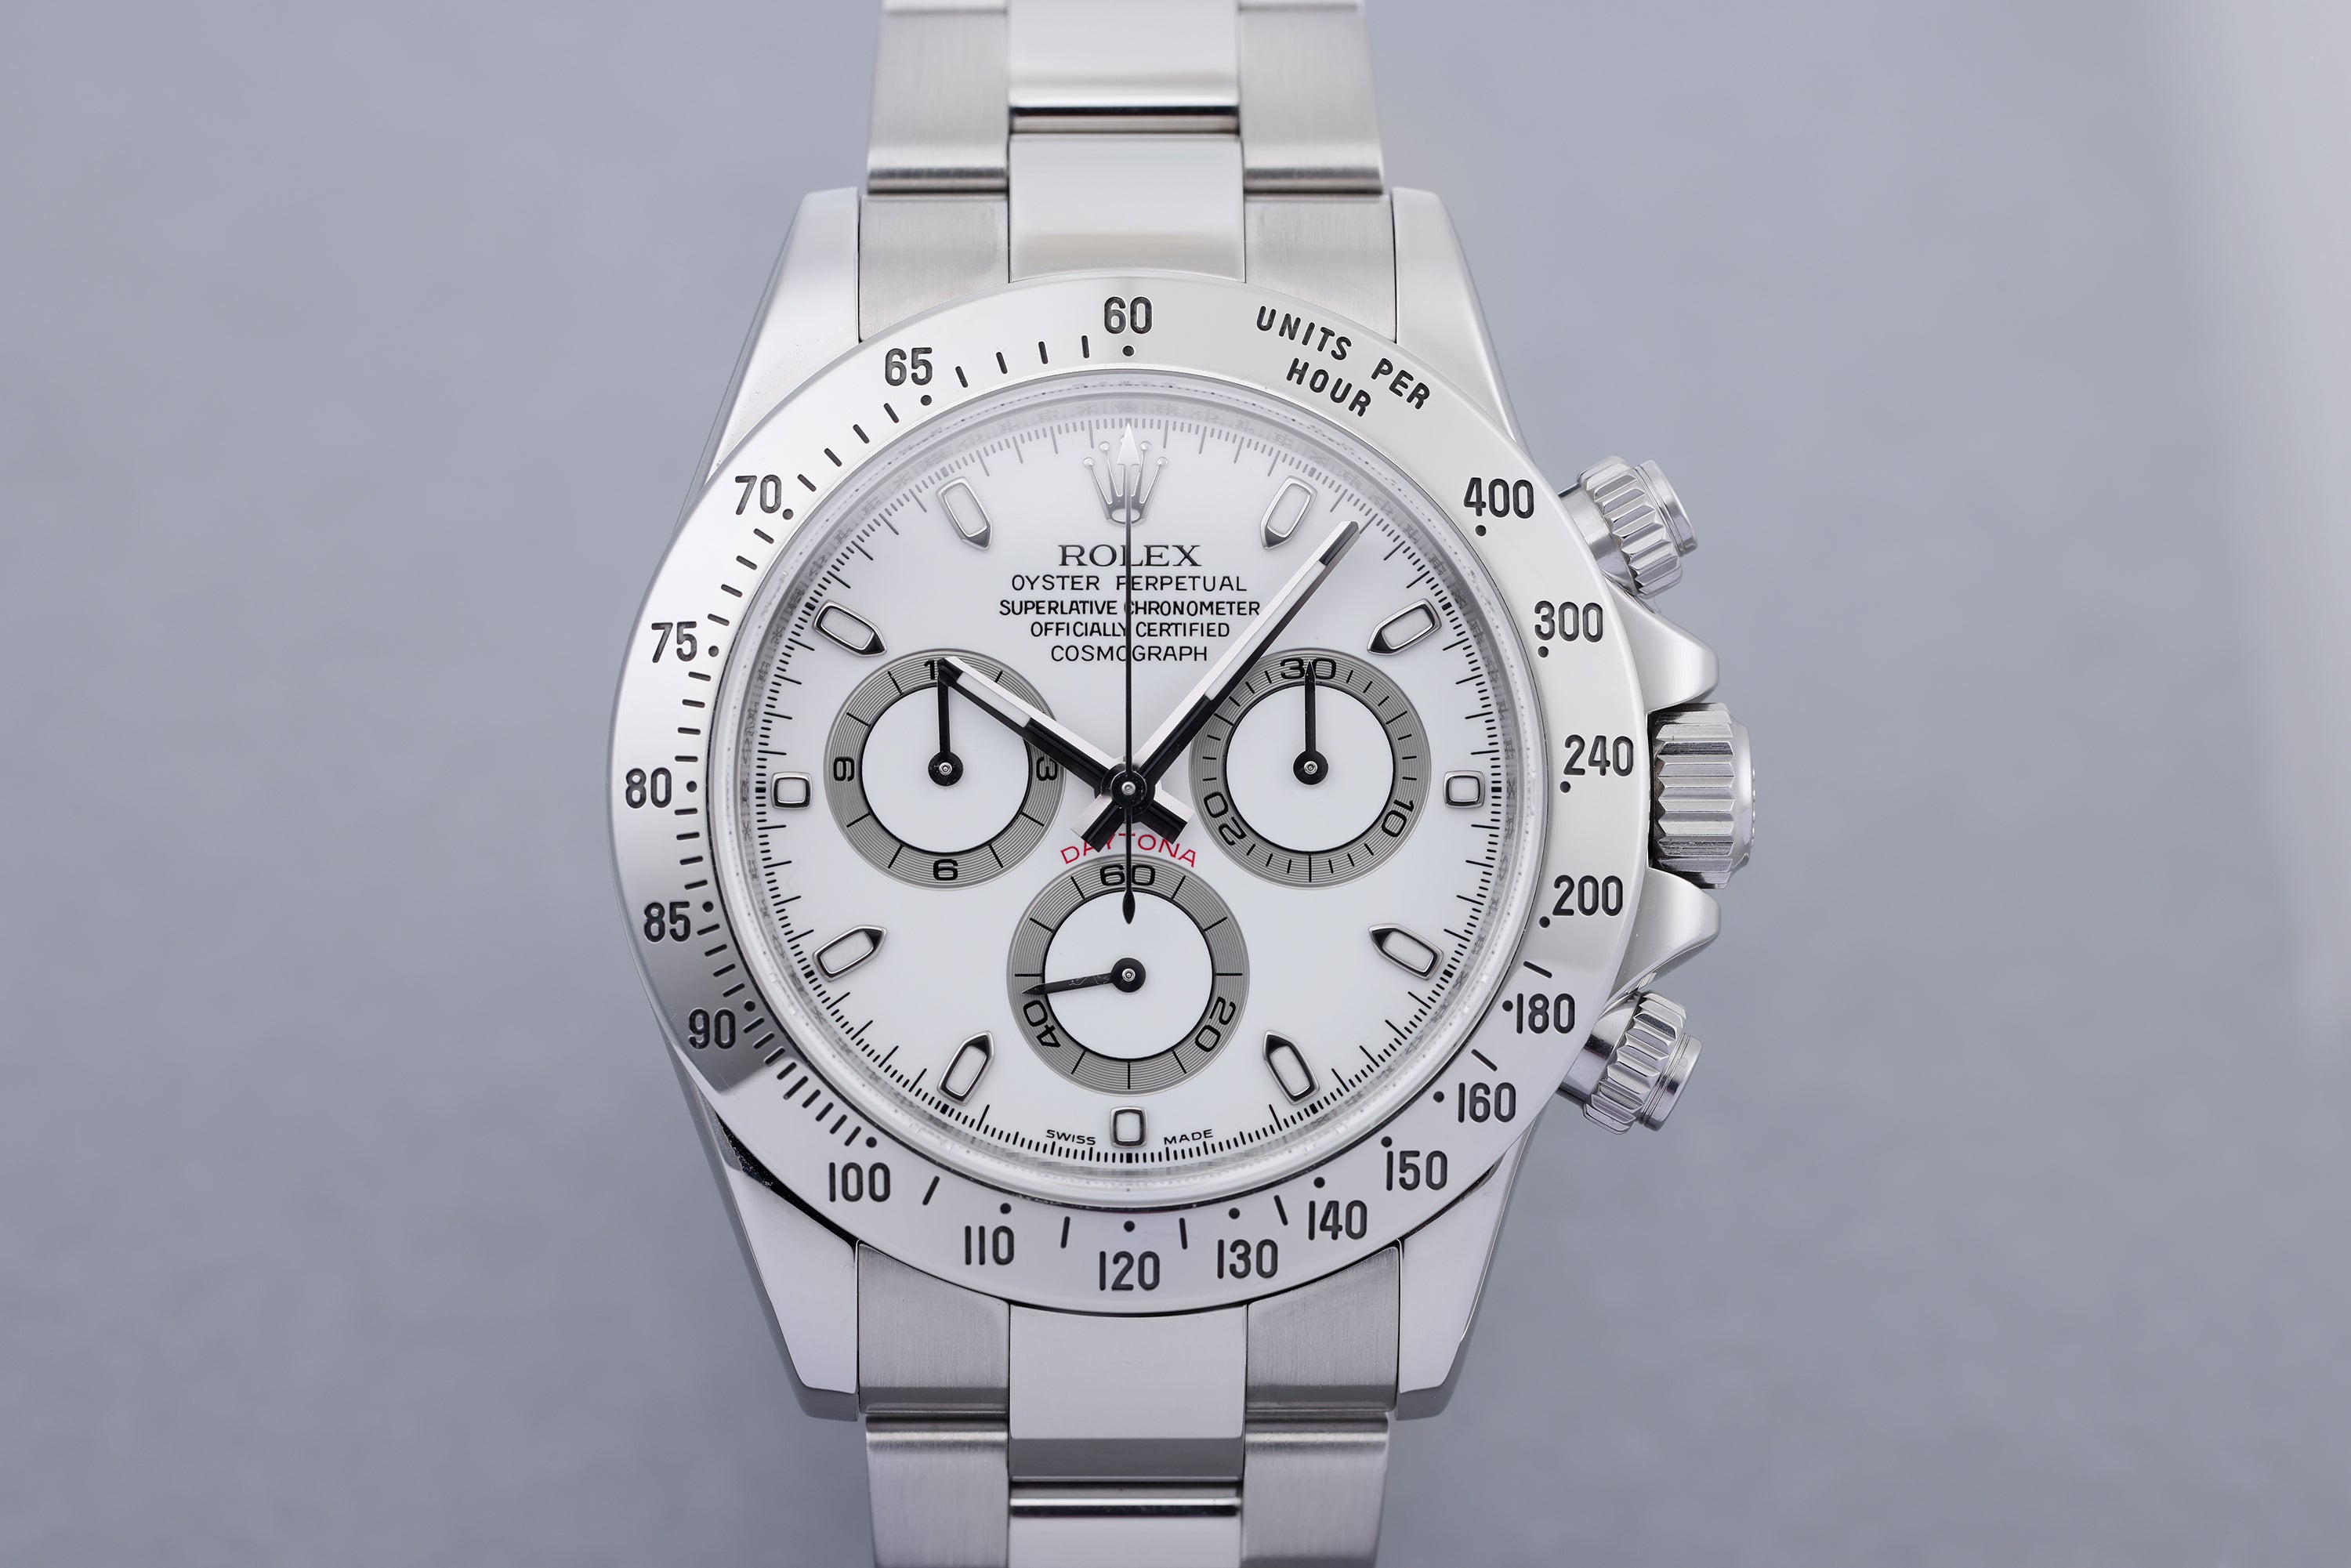 Rolex Daytona | REF. 116520 | dial | Stainless Steel | 2006 – Collectors